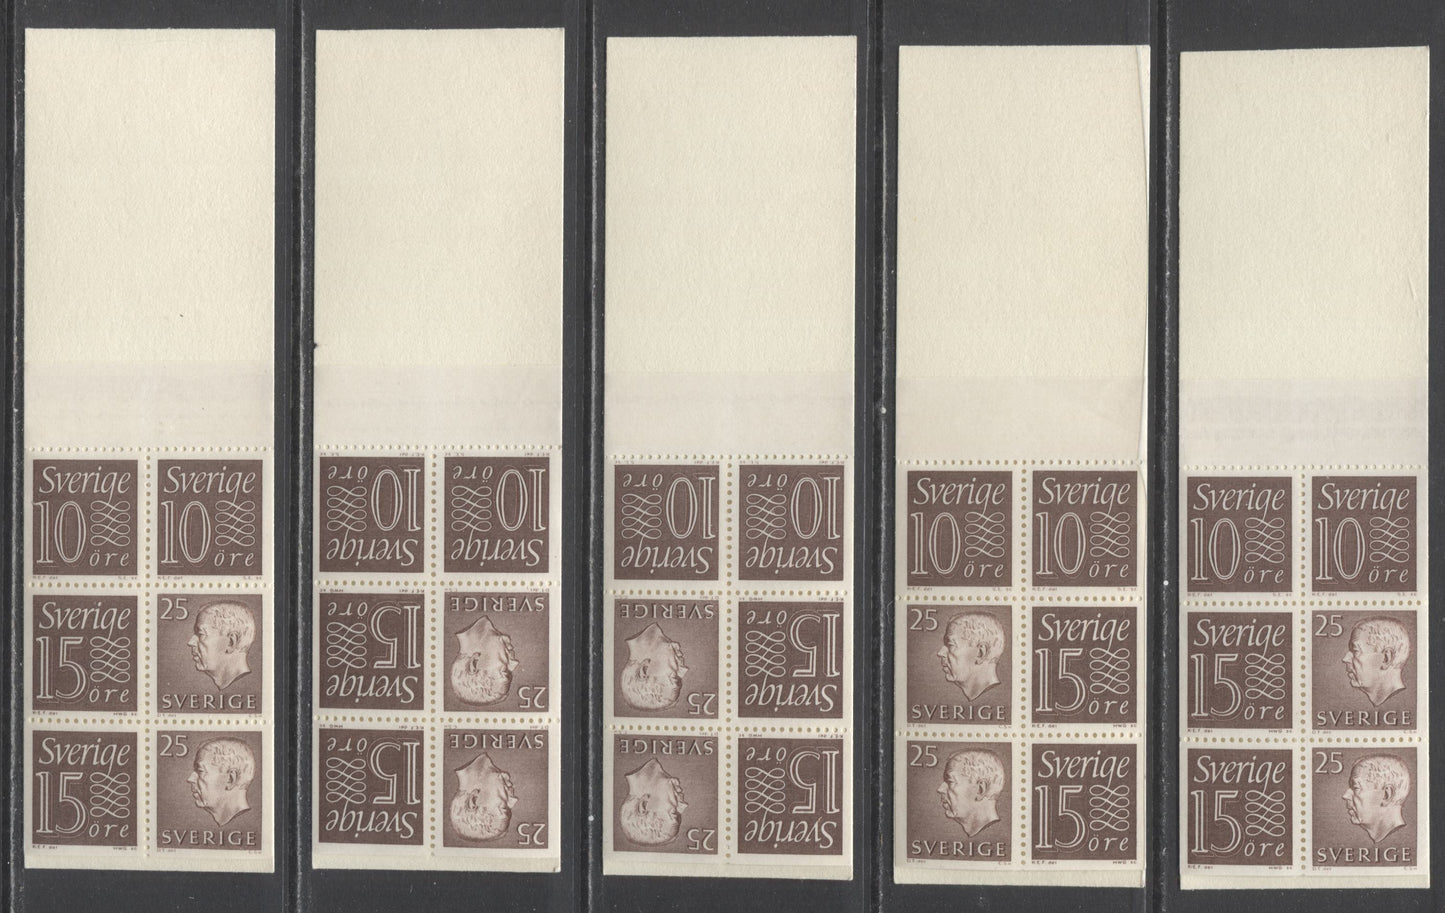 Lot 186 Sweden SC#666a (Facit #HA13ARV)/666a (Facit #HA13BOH) 1964 King Gustav VI Adolf Definitive Issue, Different Back Cover Designs, Upright & Inverted Panes, 15 Ore Stamps At left and Right, 5 VFNH Booklets of 6 (2 +2 +2), Estimated Value $15